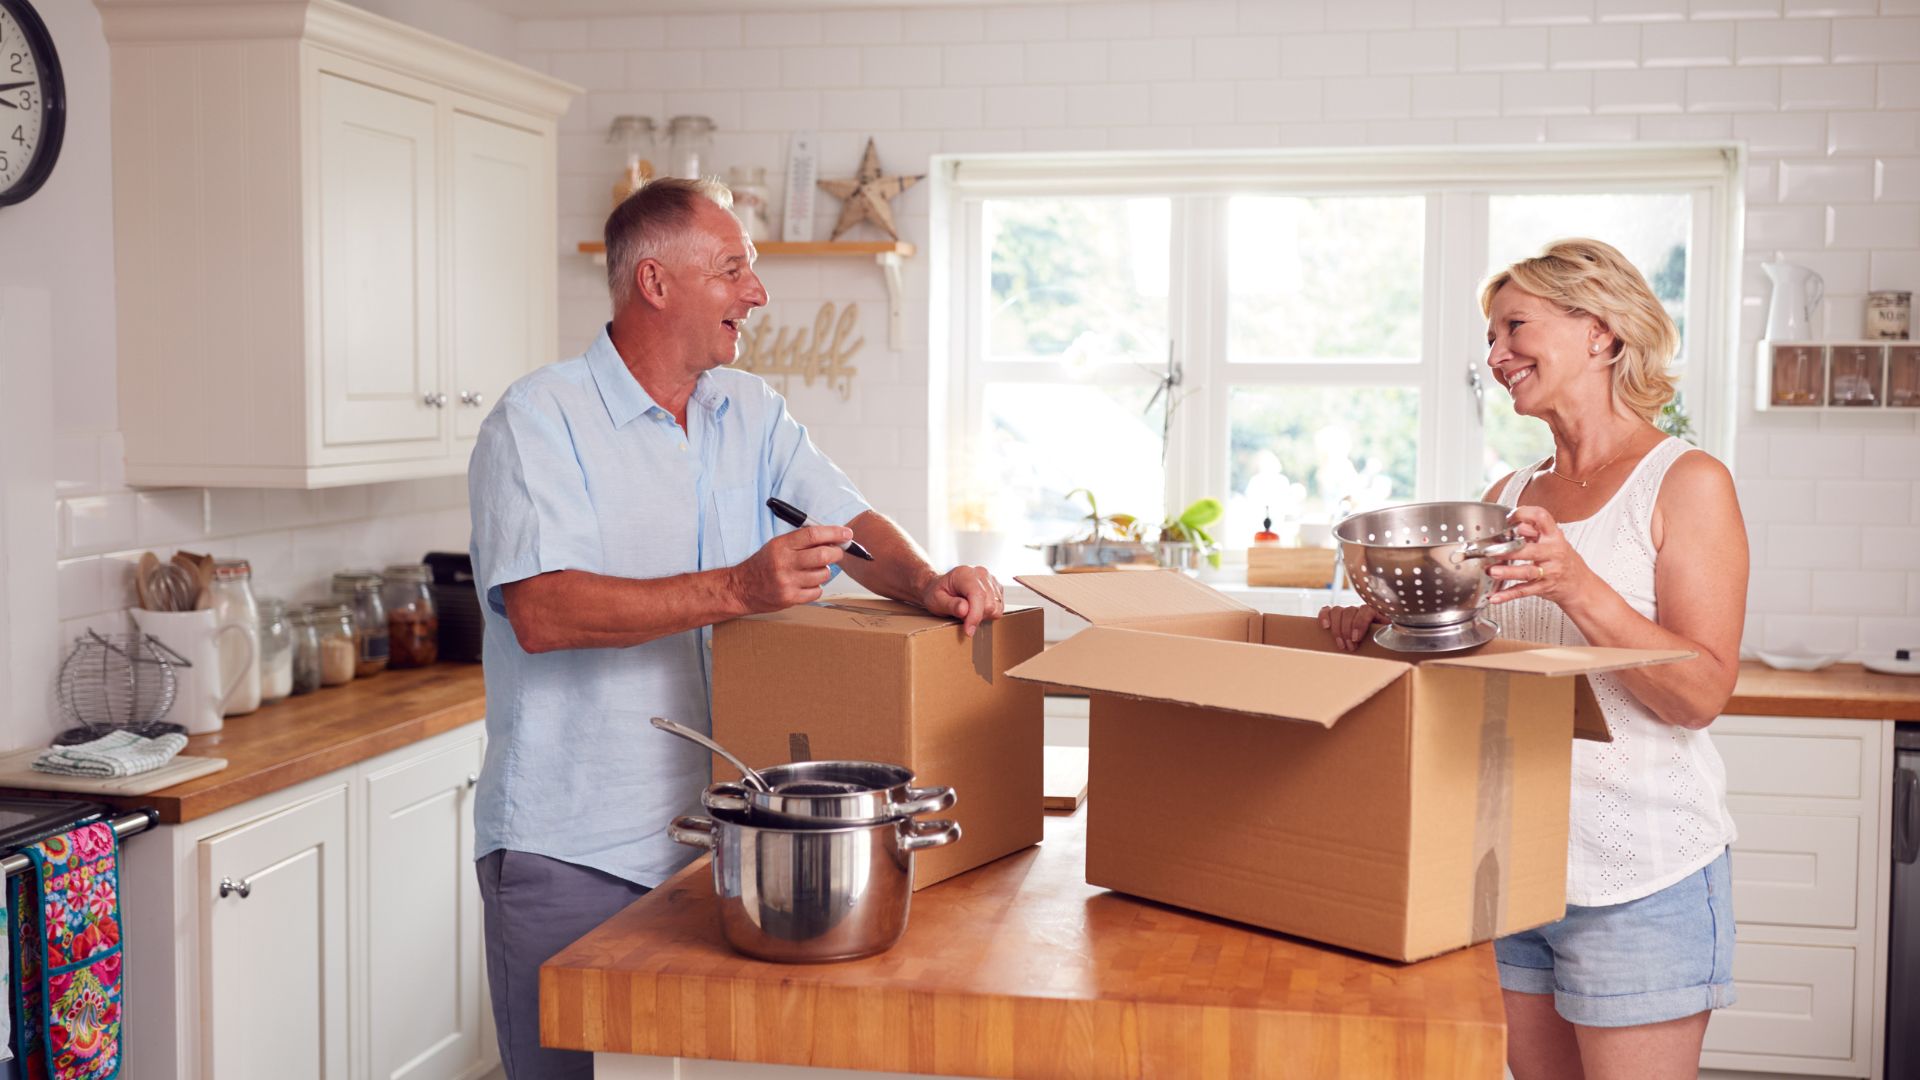 older man ands woman packing up boxes in their kitchen preparing to move